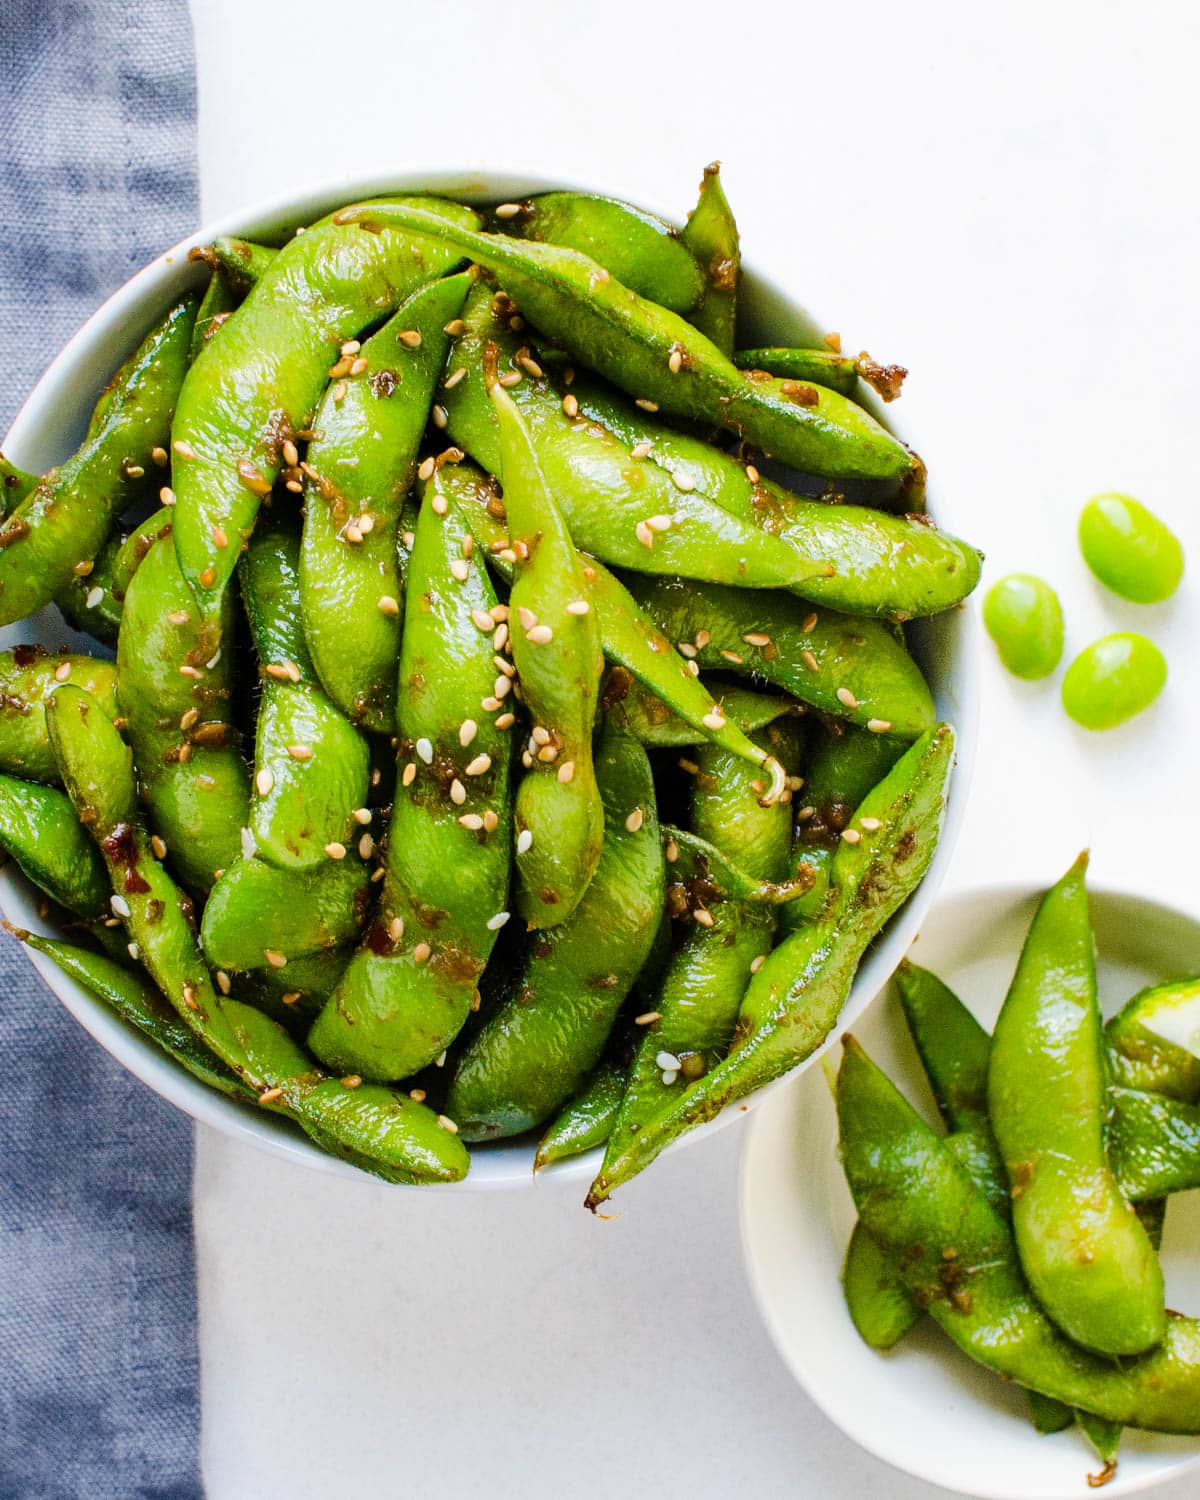 A dish of Edamame pods with ginger, garlic and seasoning.